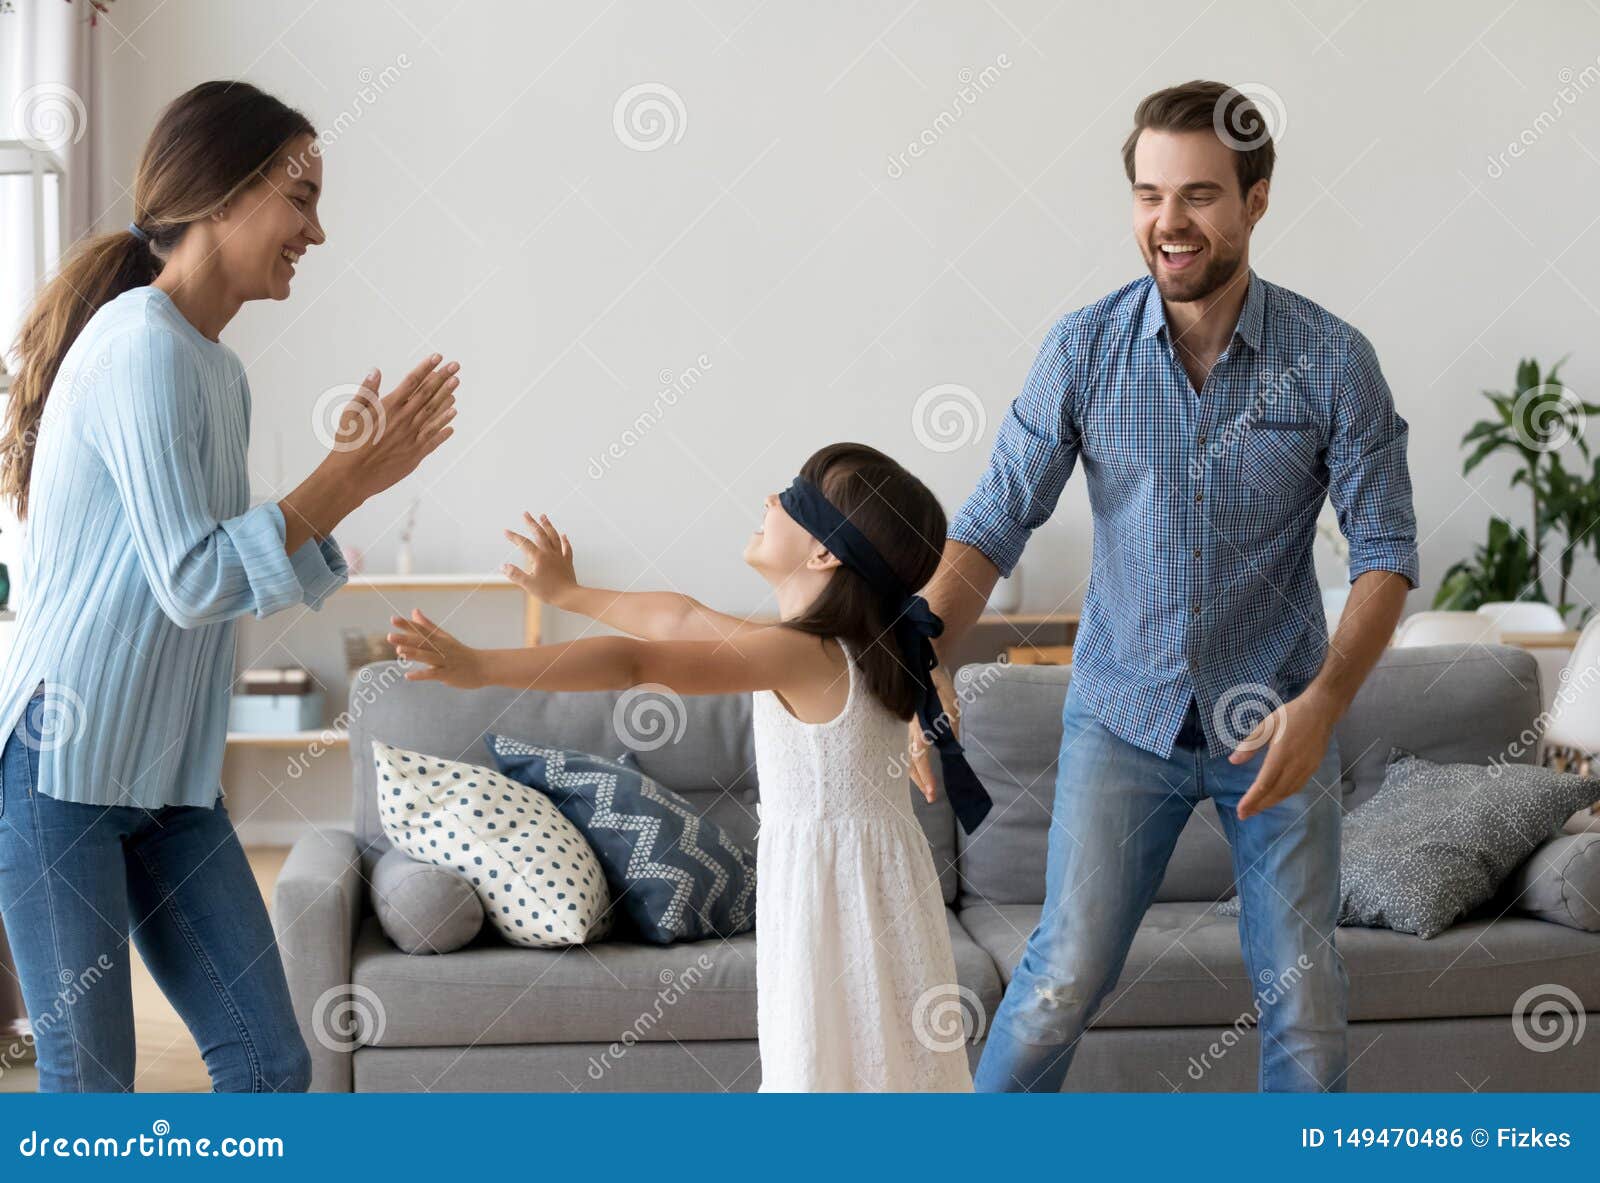 Funny Game Stock Photos - 597,436 Images